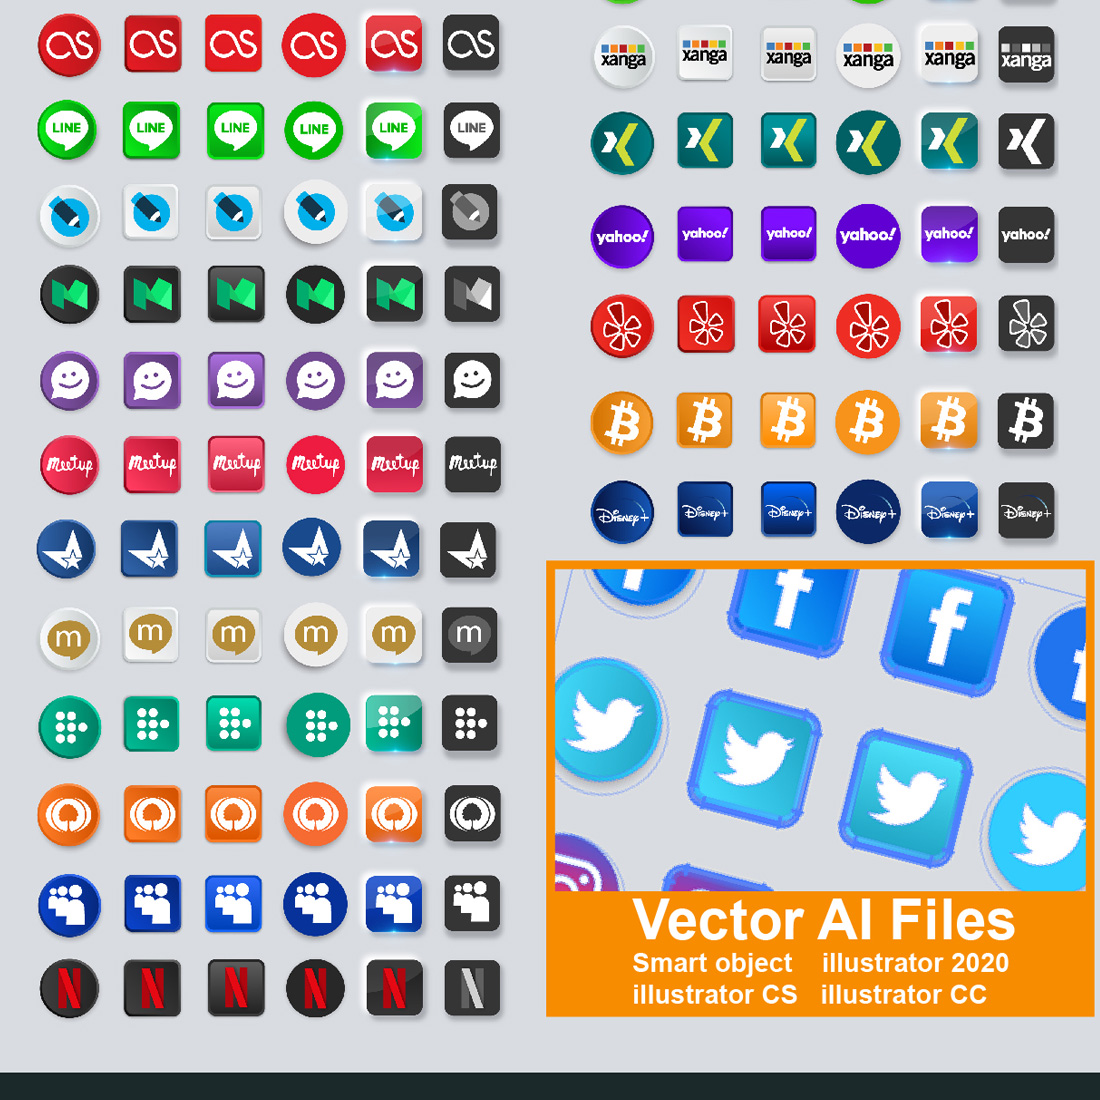 Icon Set Updated Social Media cover image.